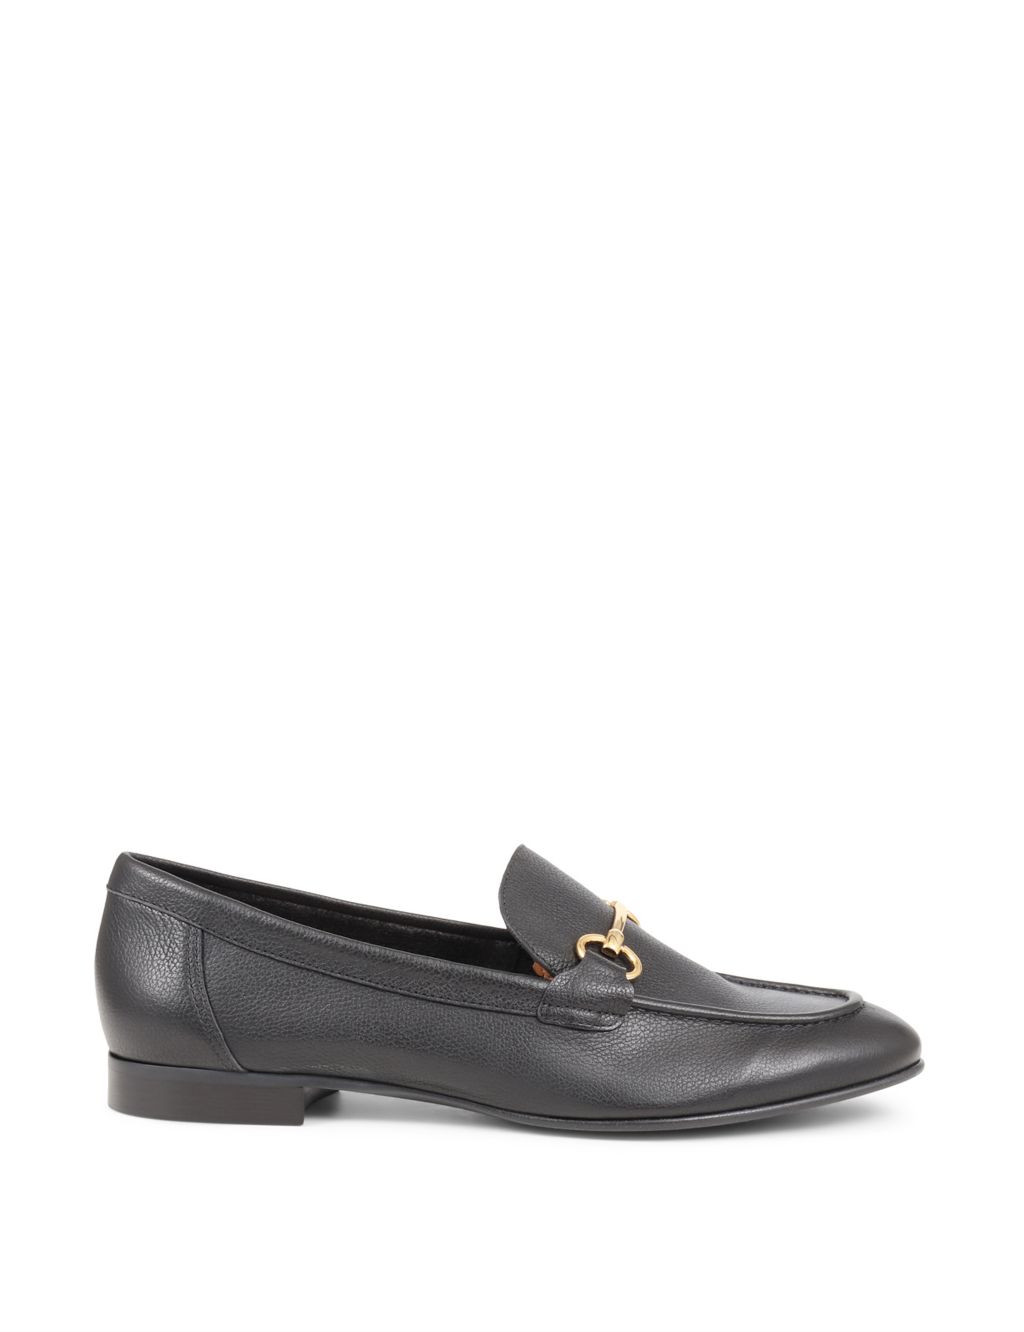 Leather Bar Slip On Loafers 1 of 7